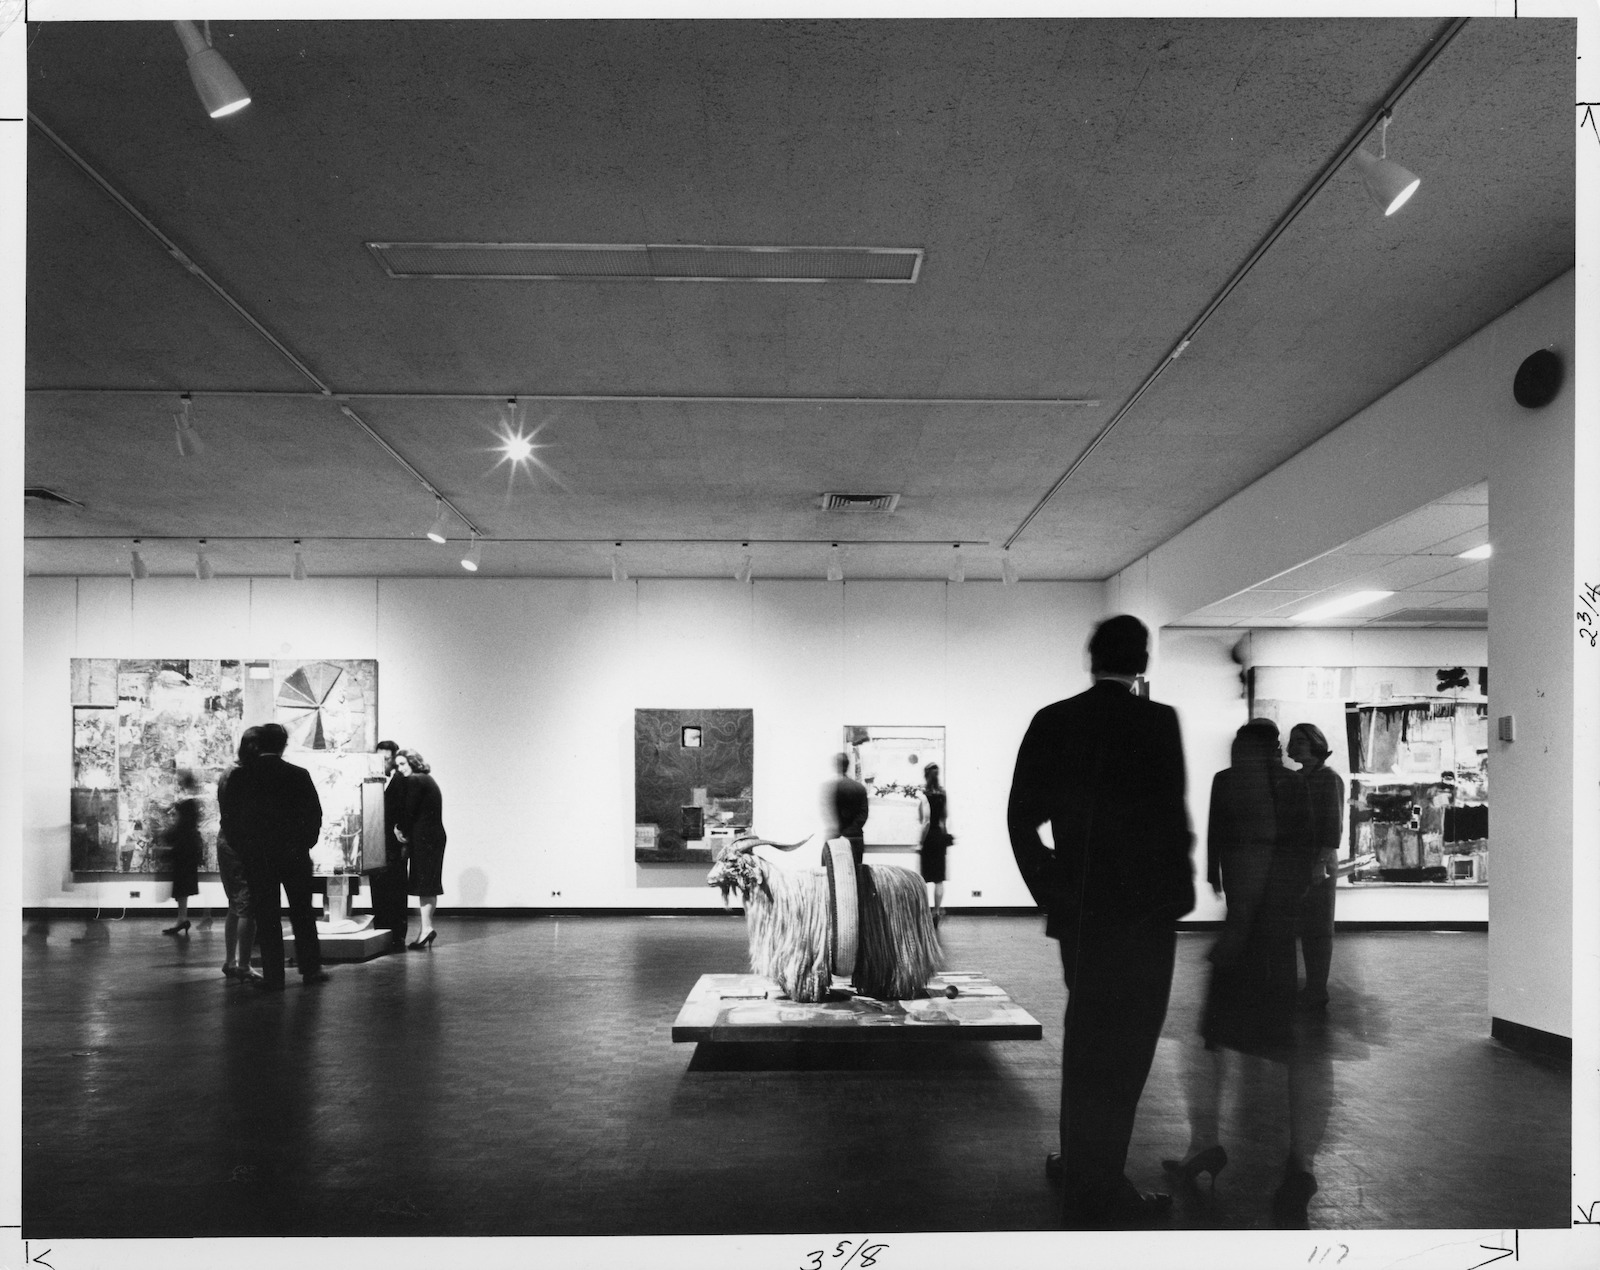 A black-and-white photograph of people swirling in a room with artworks on display